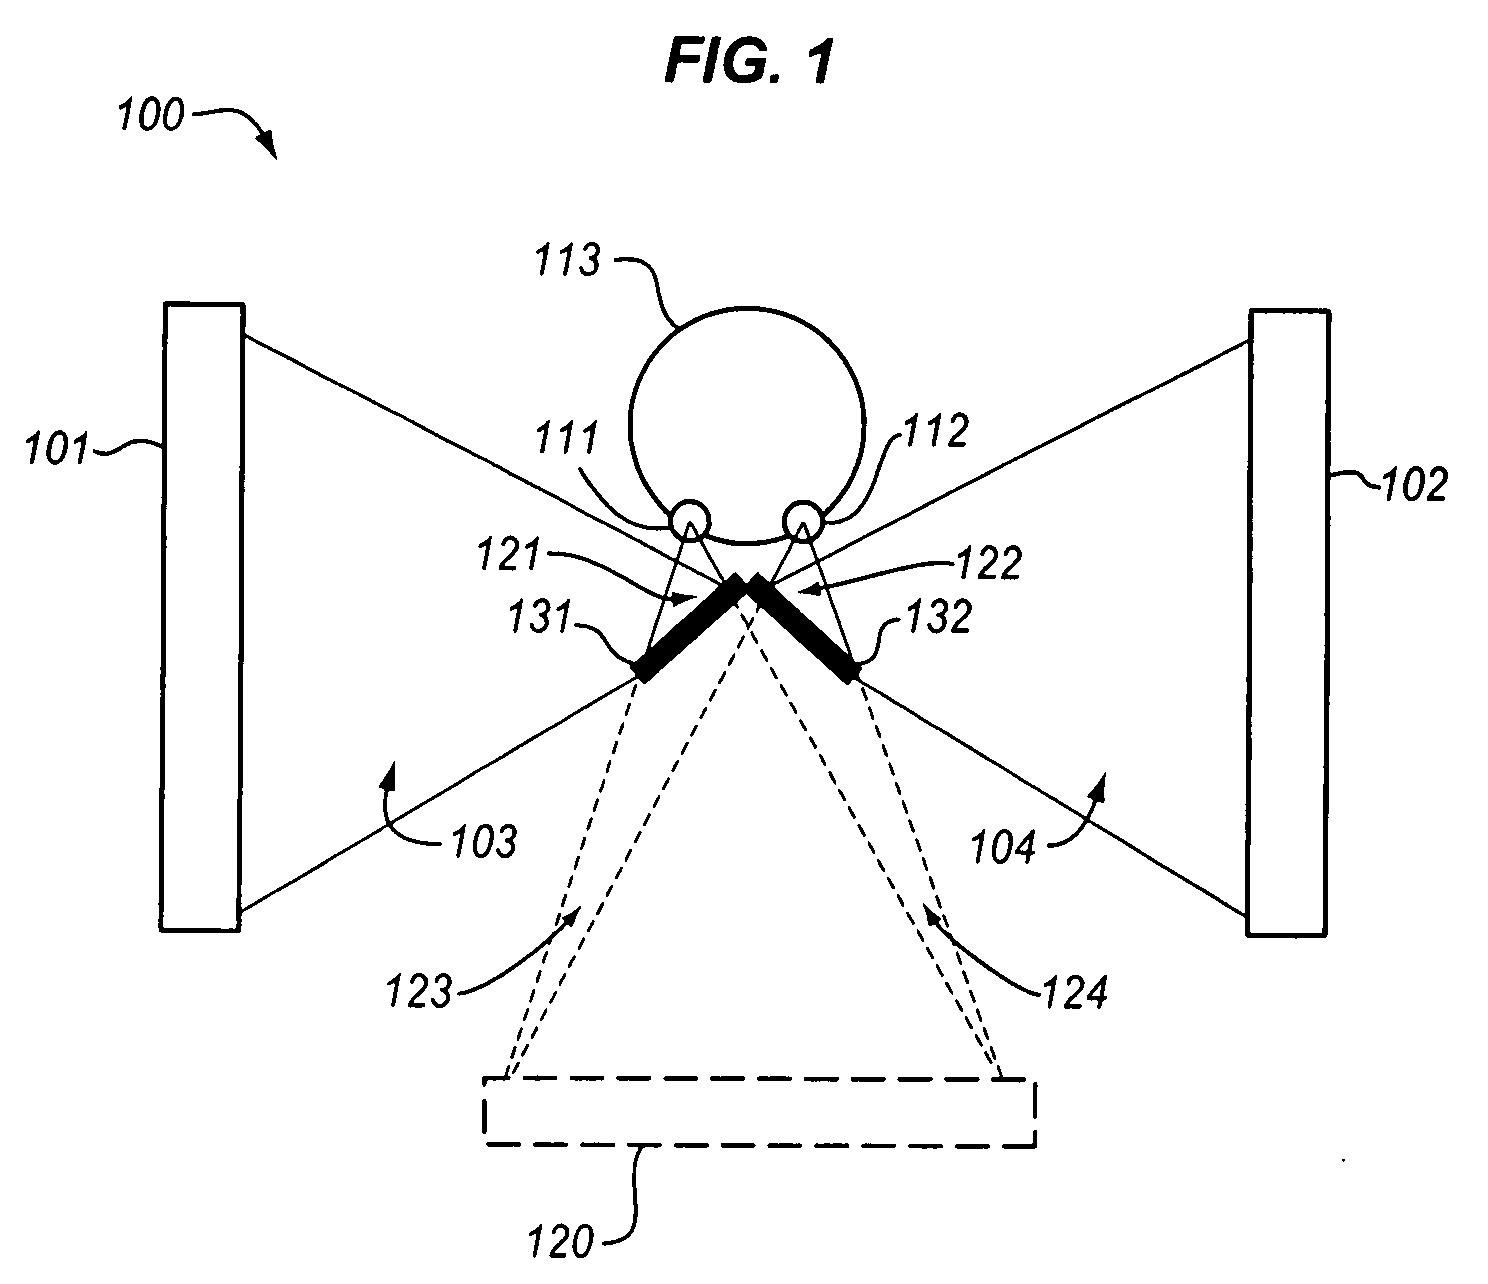 Terminal device for presenting an improved virtual environment to a user